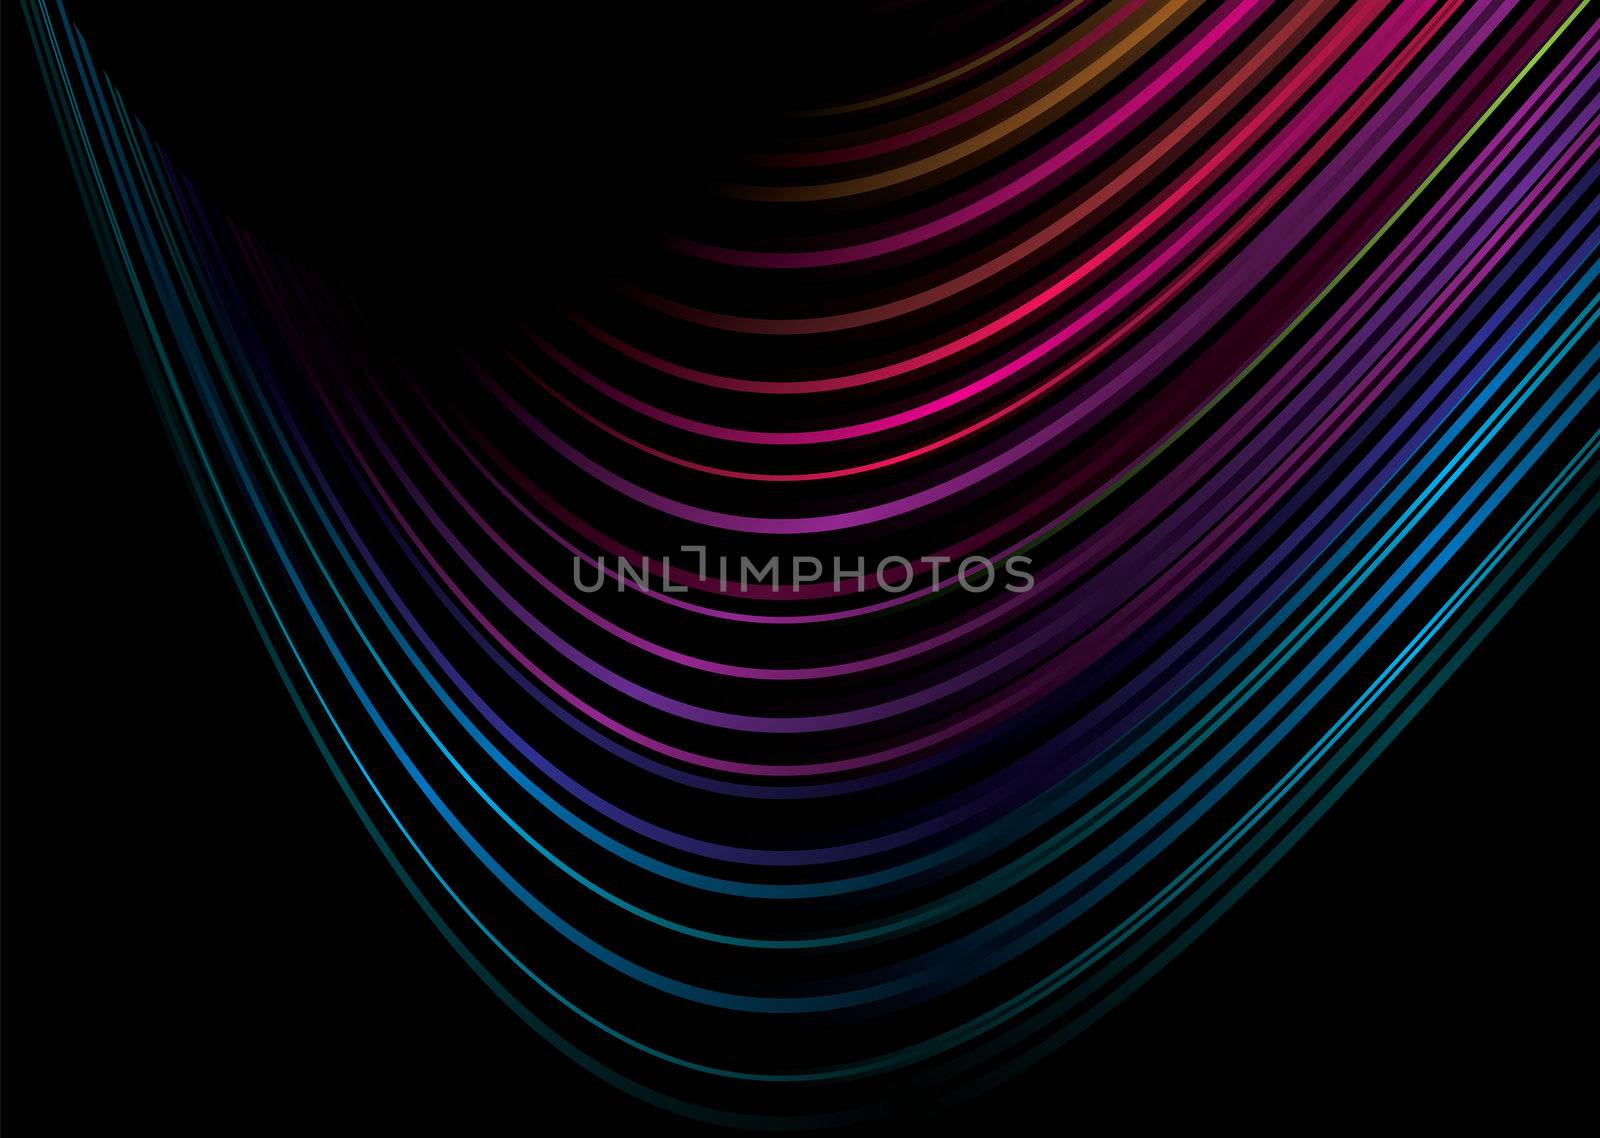 Bright colorful rainbow background with room to add your own text